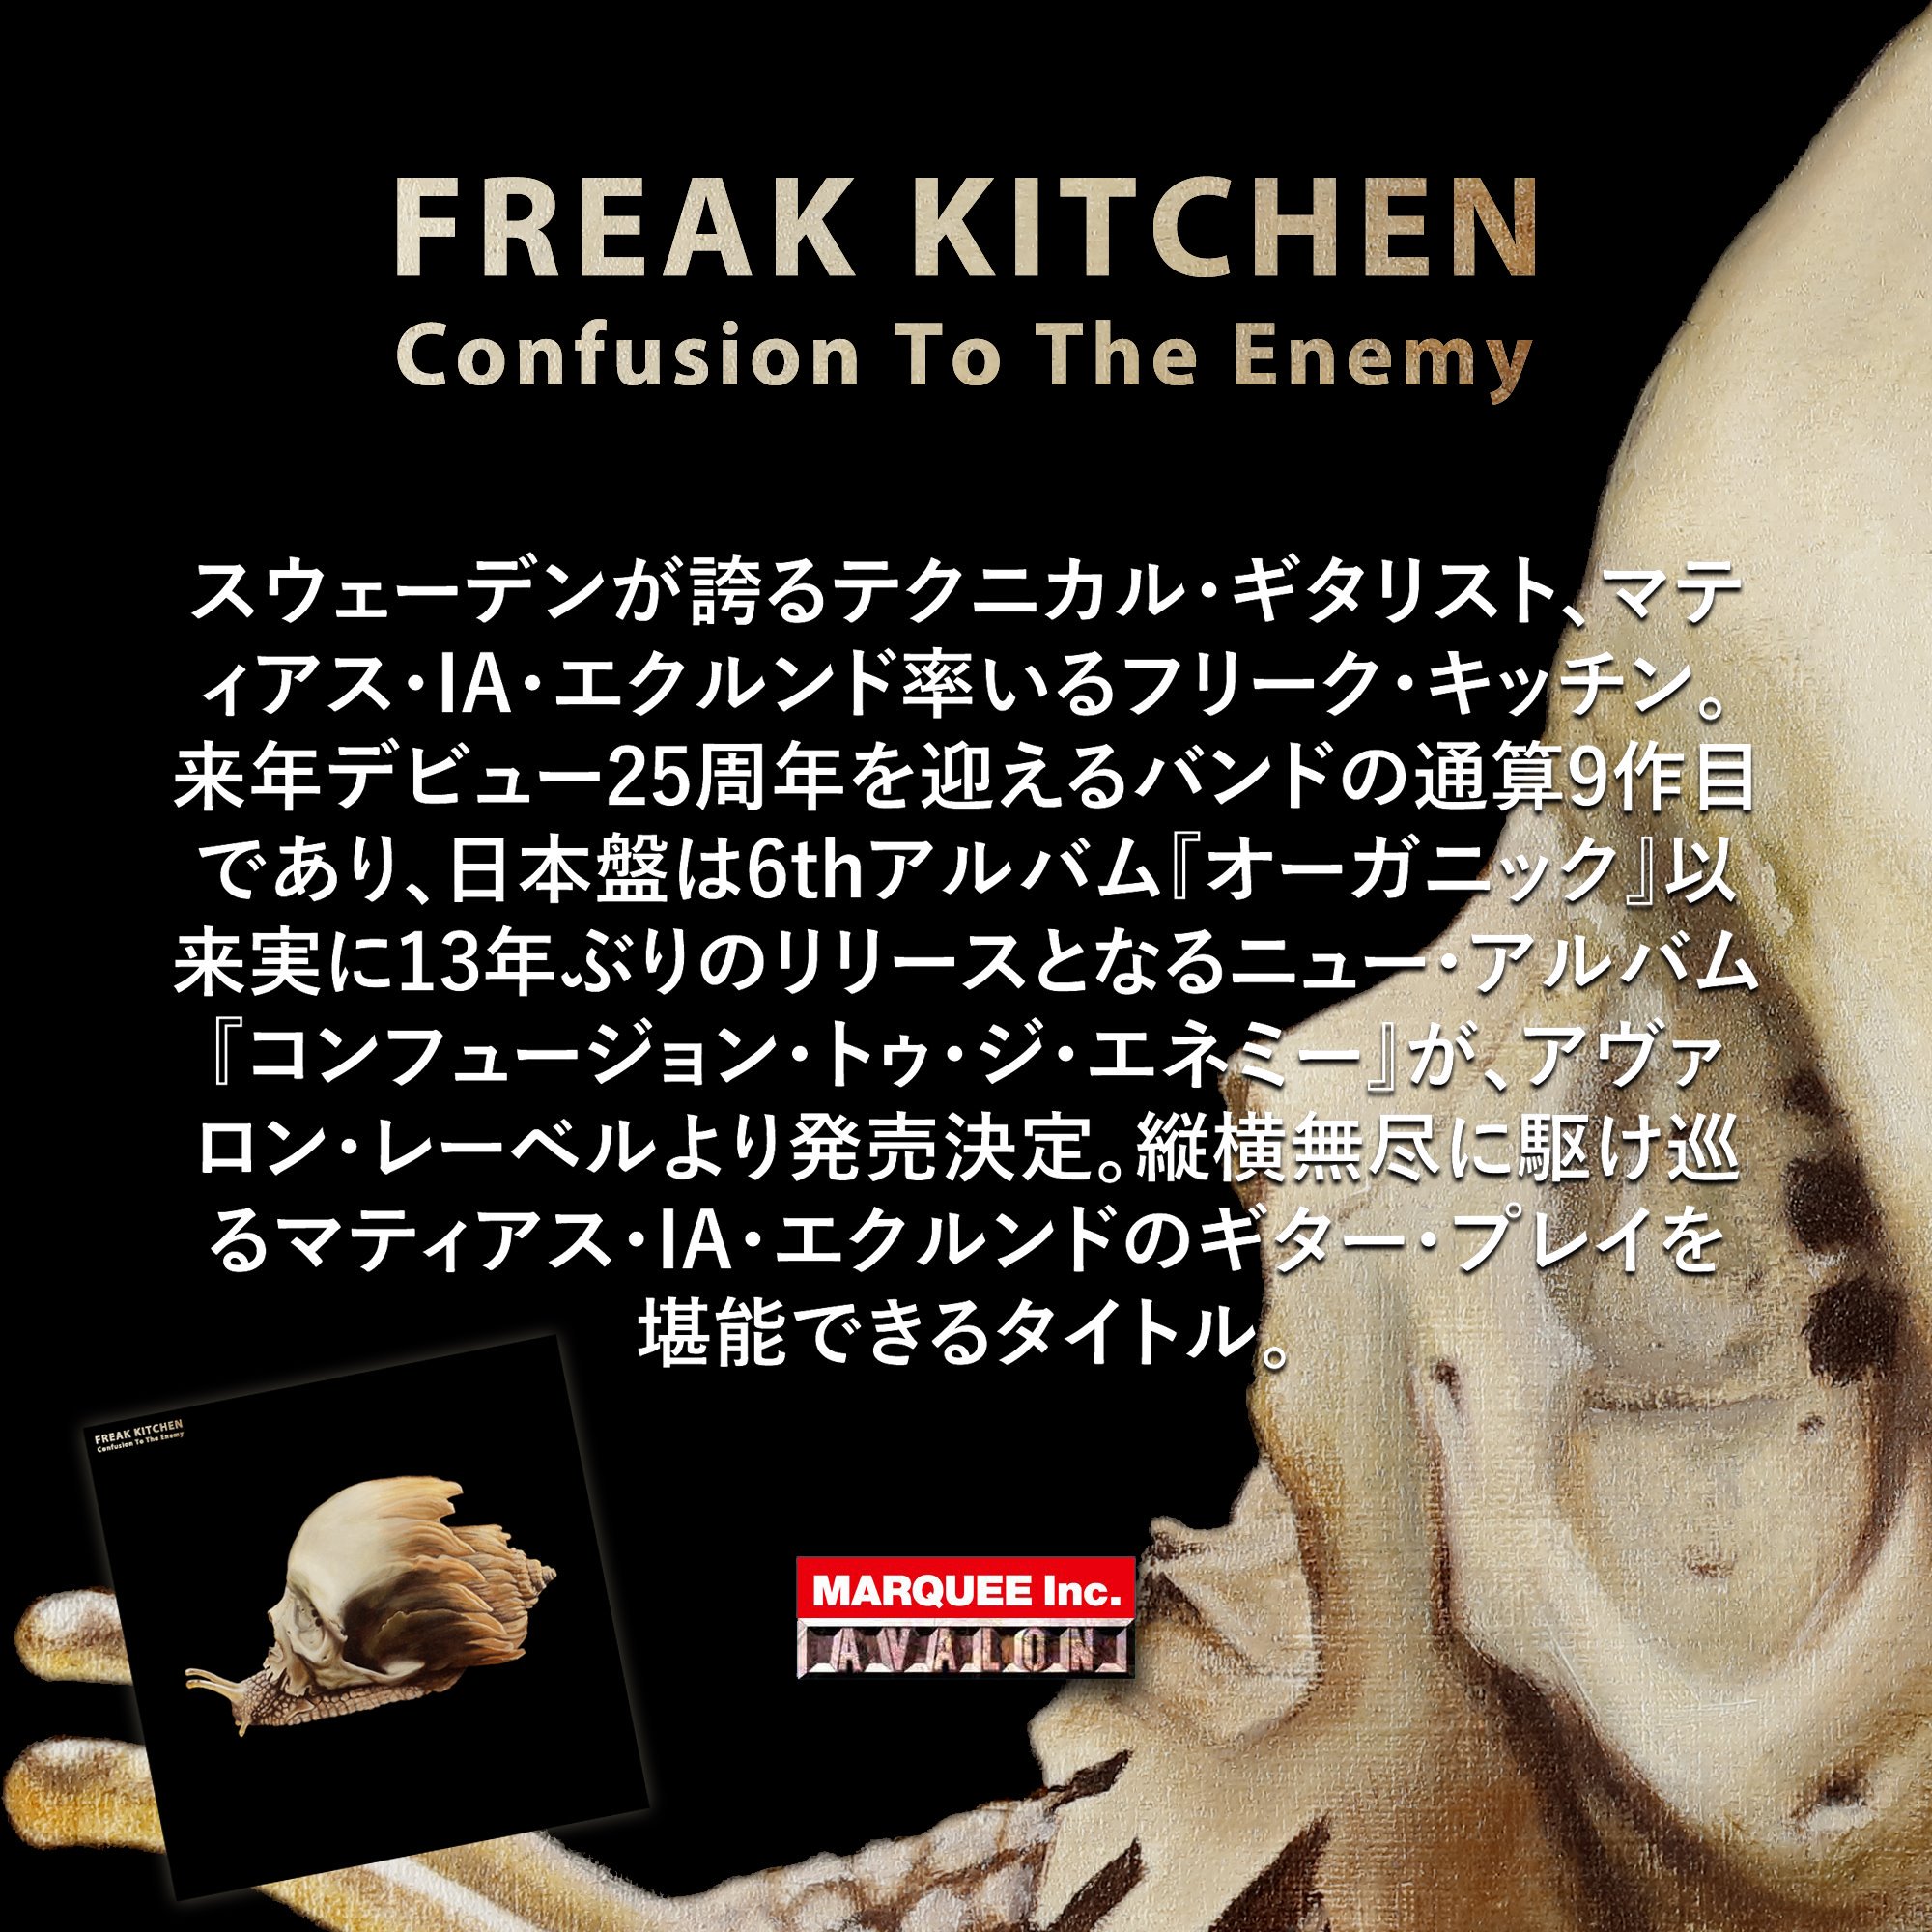 Freak Kitchen Good News For Our Japanese Freak Friends Confusion To The Enemy Will Be Released December 19th By Marquee Avalon In A Groovy Pressing T Co Ypd40hw8s9 T Co Facrjk2dyd Twitter